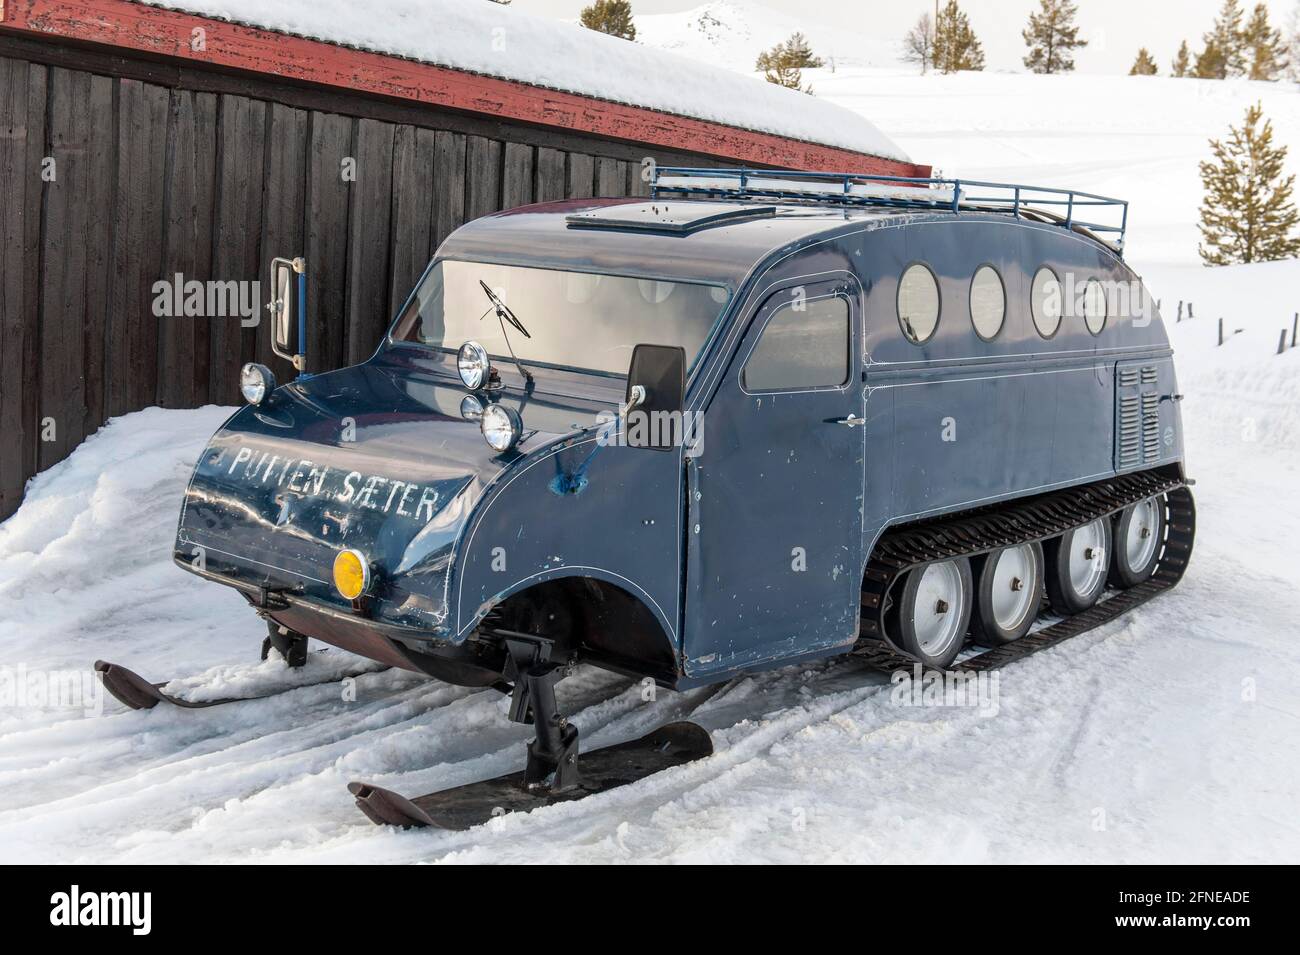 https://c8.alamy.com/comp/2FNEADE/oldtimer-auto-neige-bombardier-snowmobile-b12-with-skis-and-chains-in-winter-in-the-snow-putten-seter-laargard-hovringen-hoevringen-2FNEADE.jpg